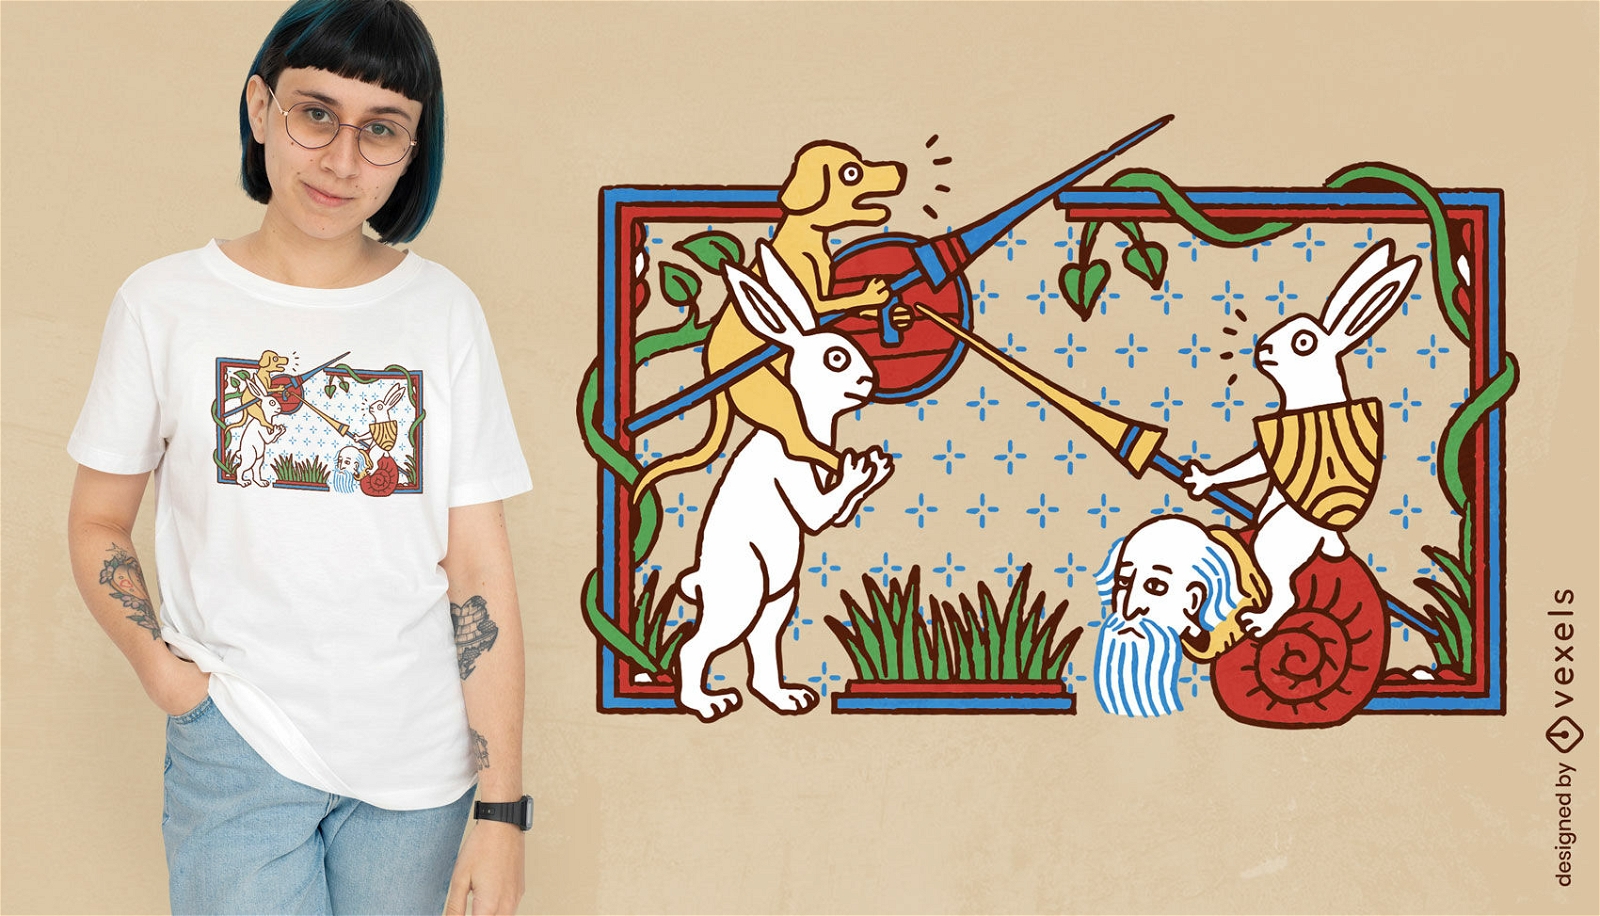 Medieval book scene with animals t-shirt design